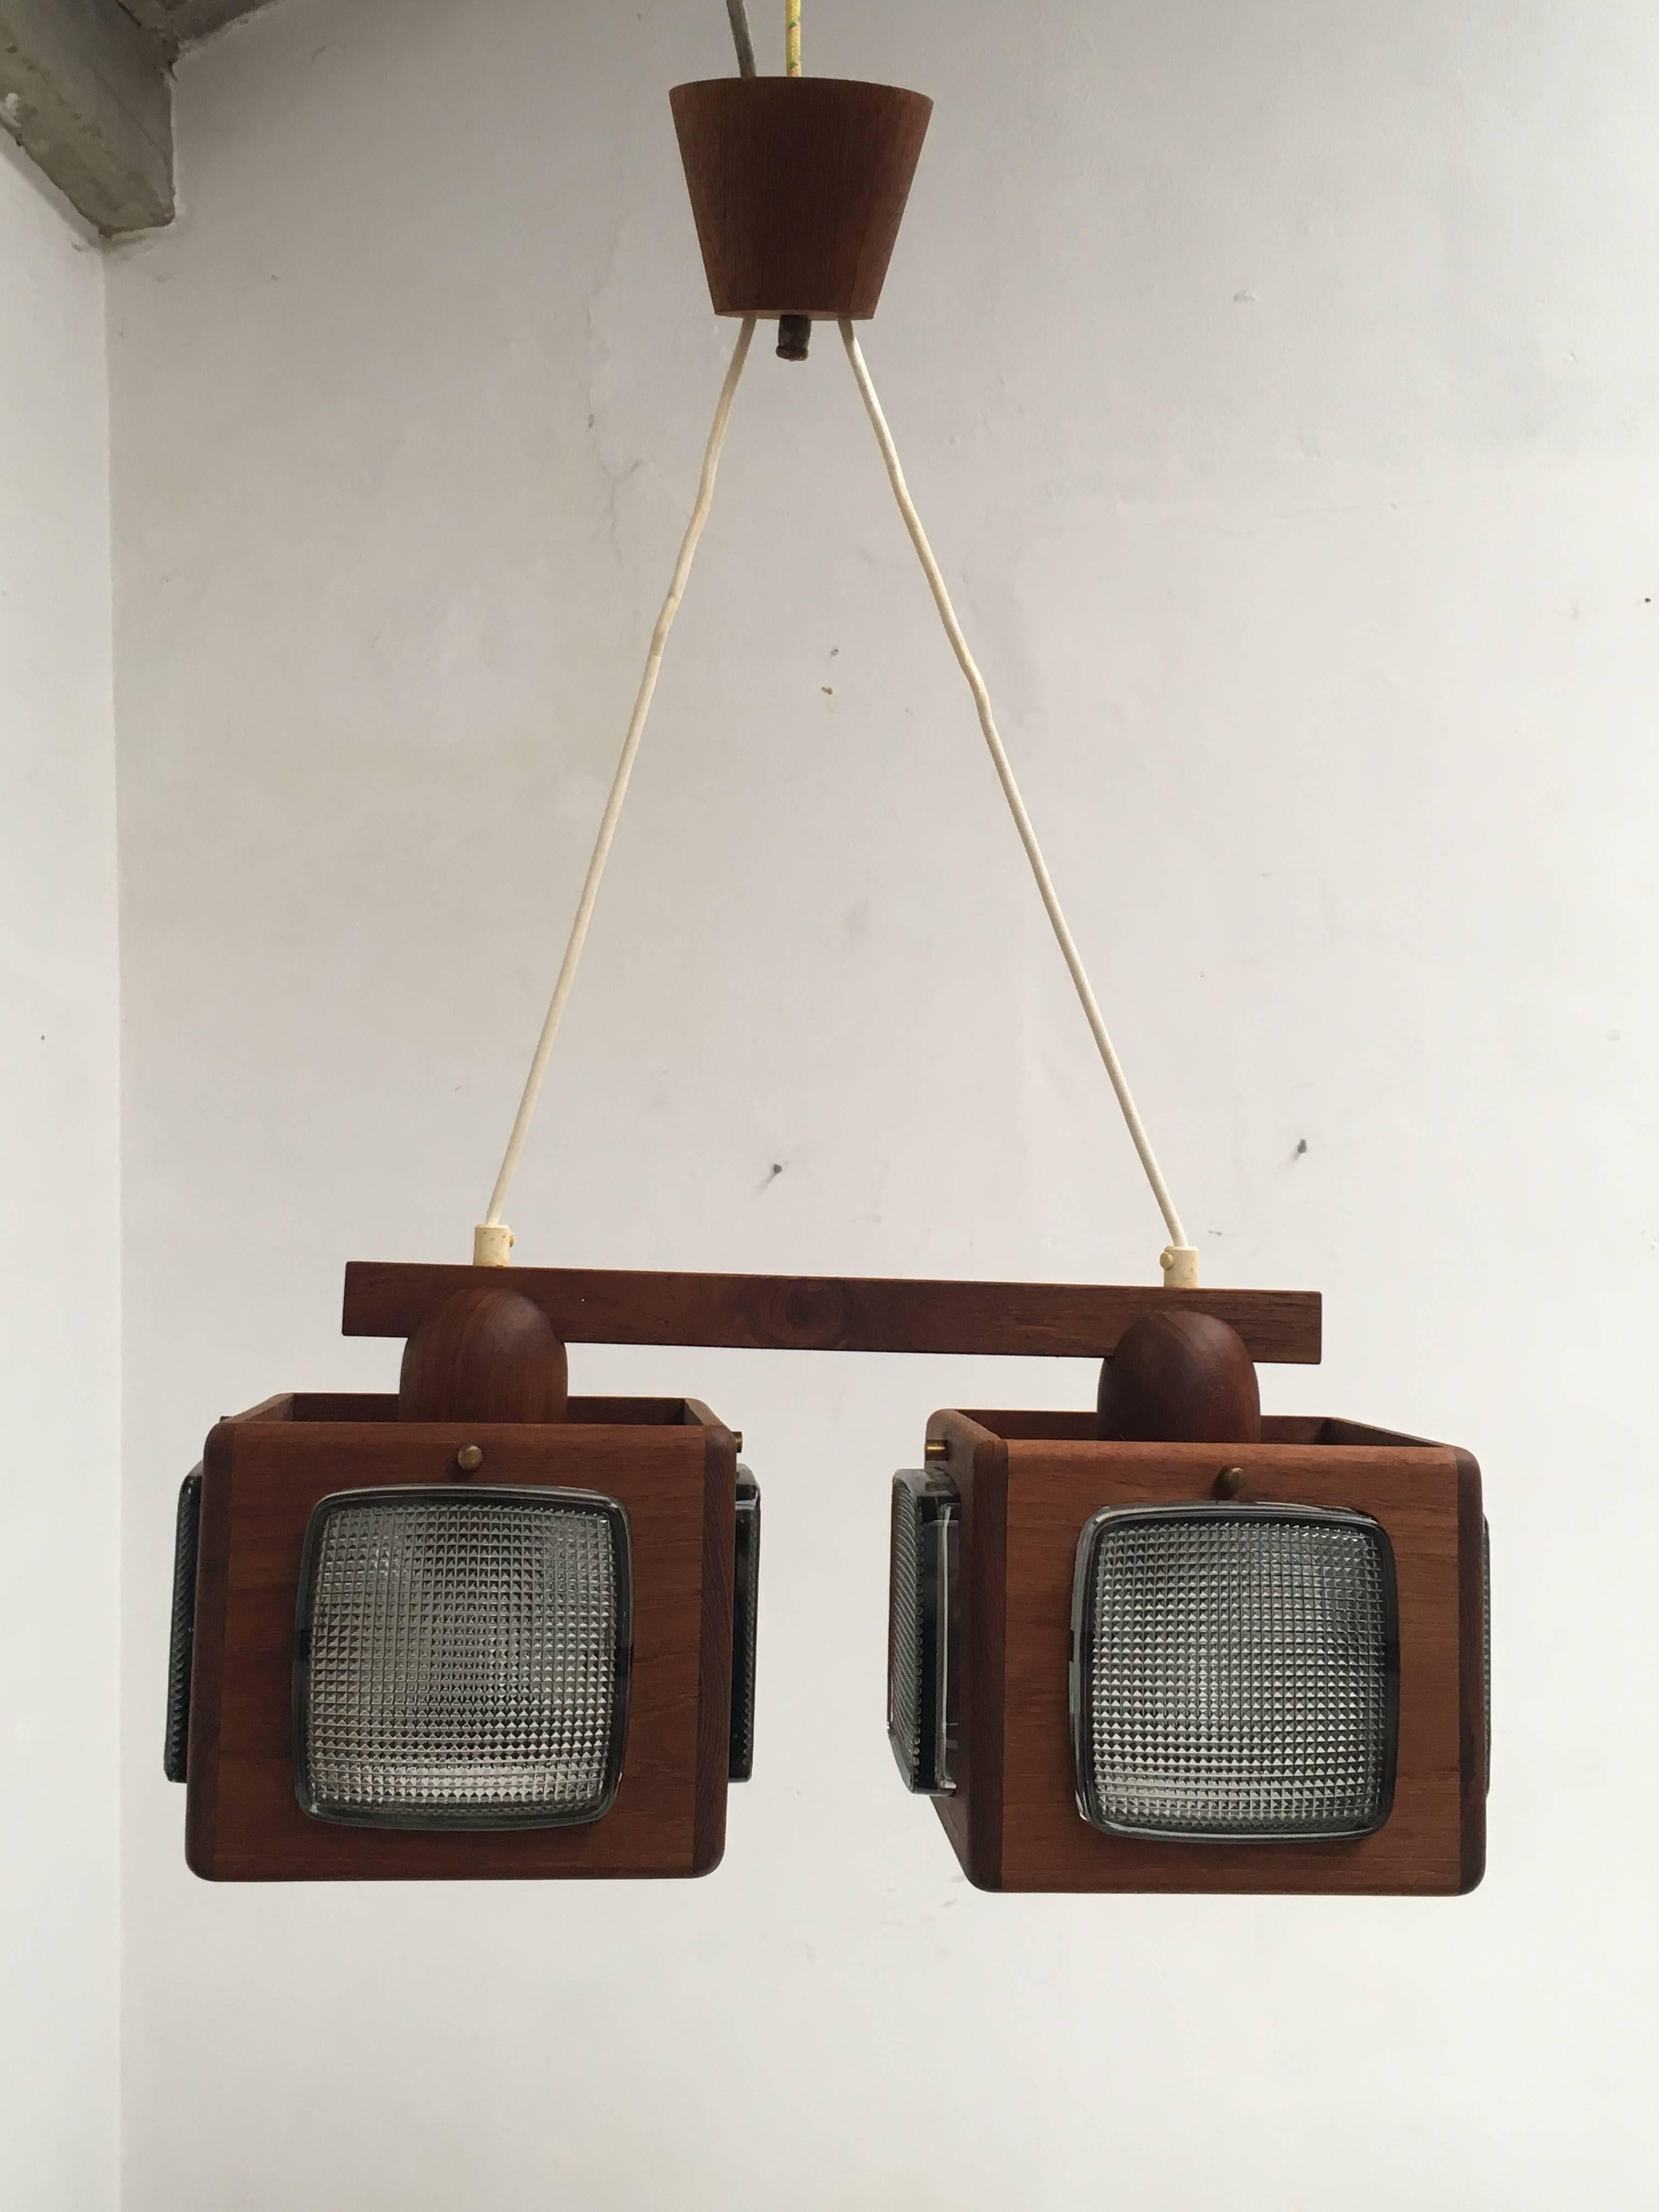 Pressed Cubic Vitrika Pendant Teak, Brass and Orrefors Glass, 1960s For Sale